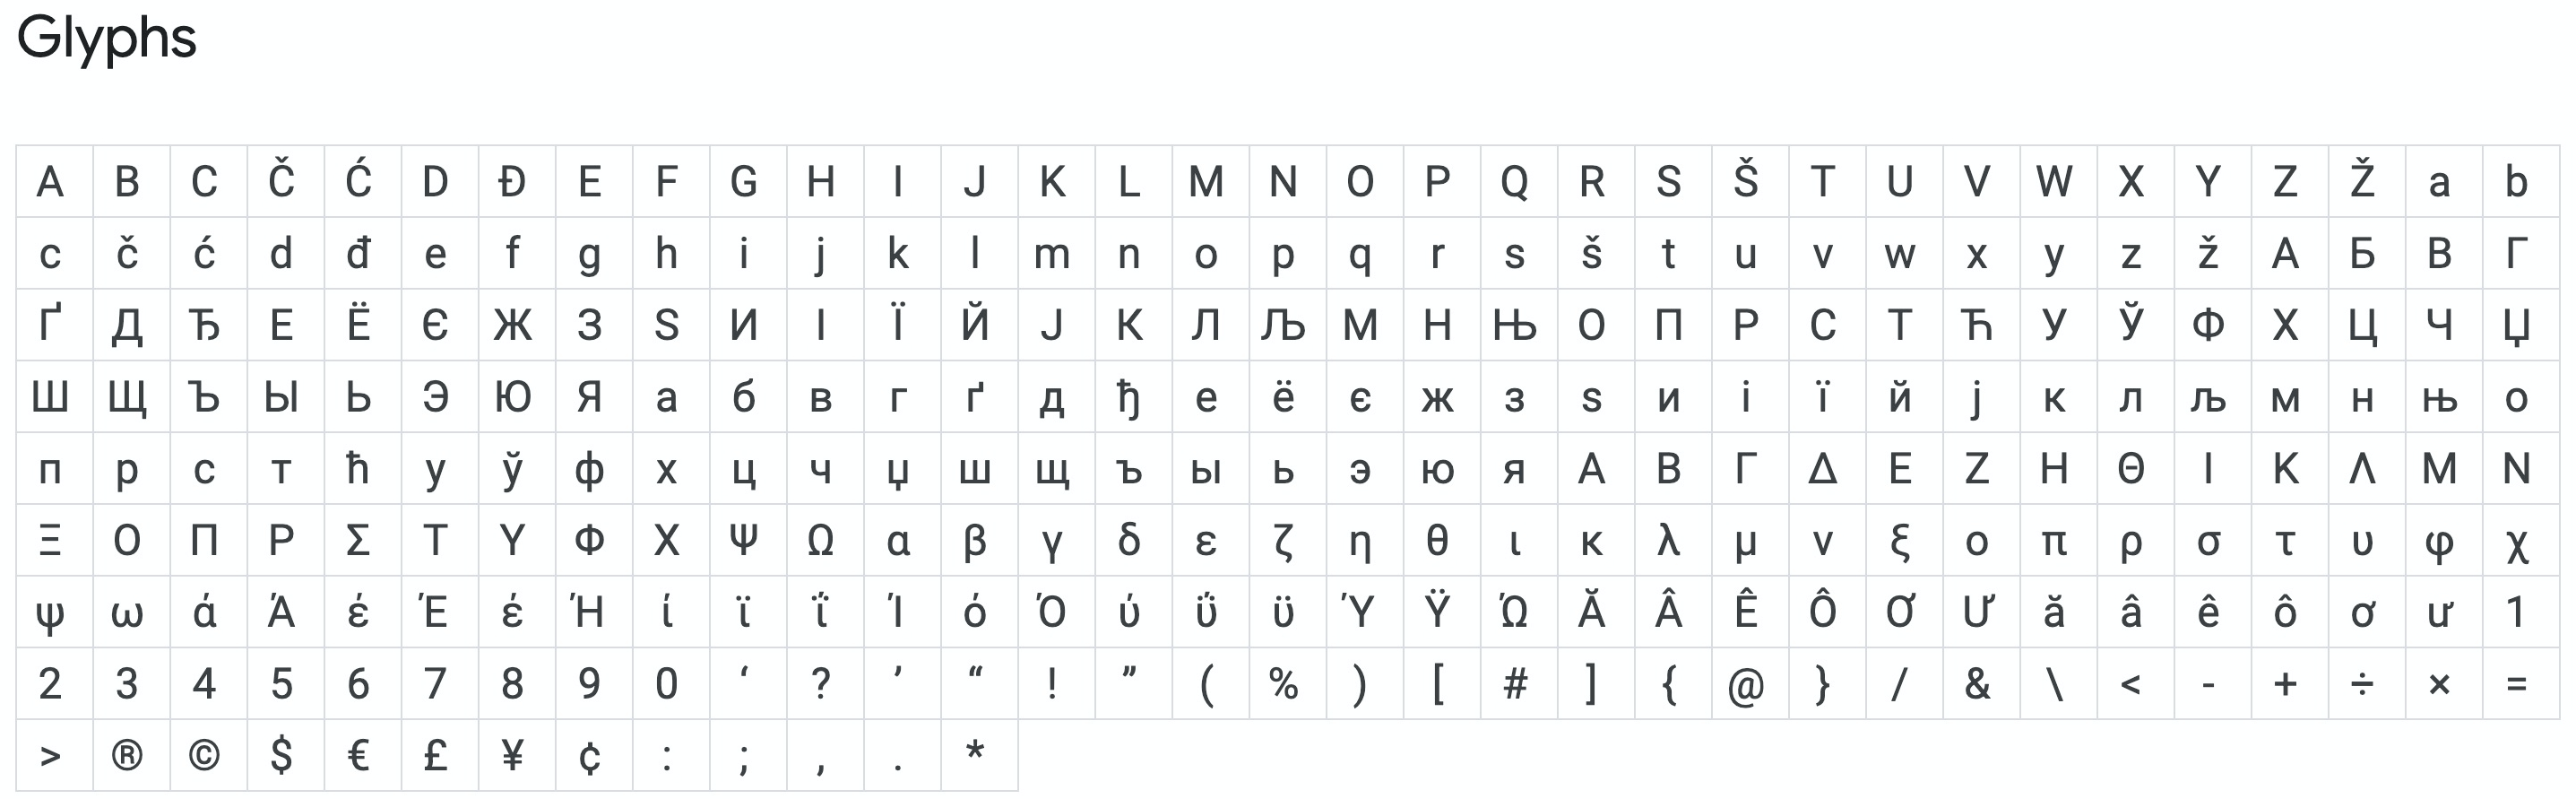 image of all glyphs in the roboto font from google, showing many non-latin characters